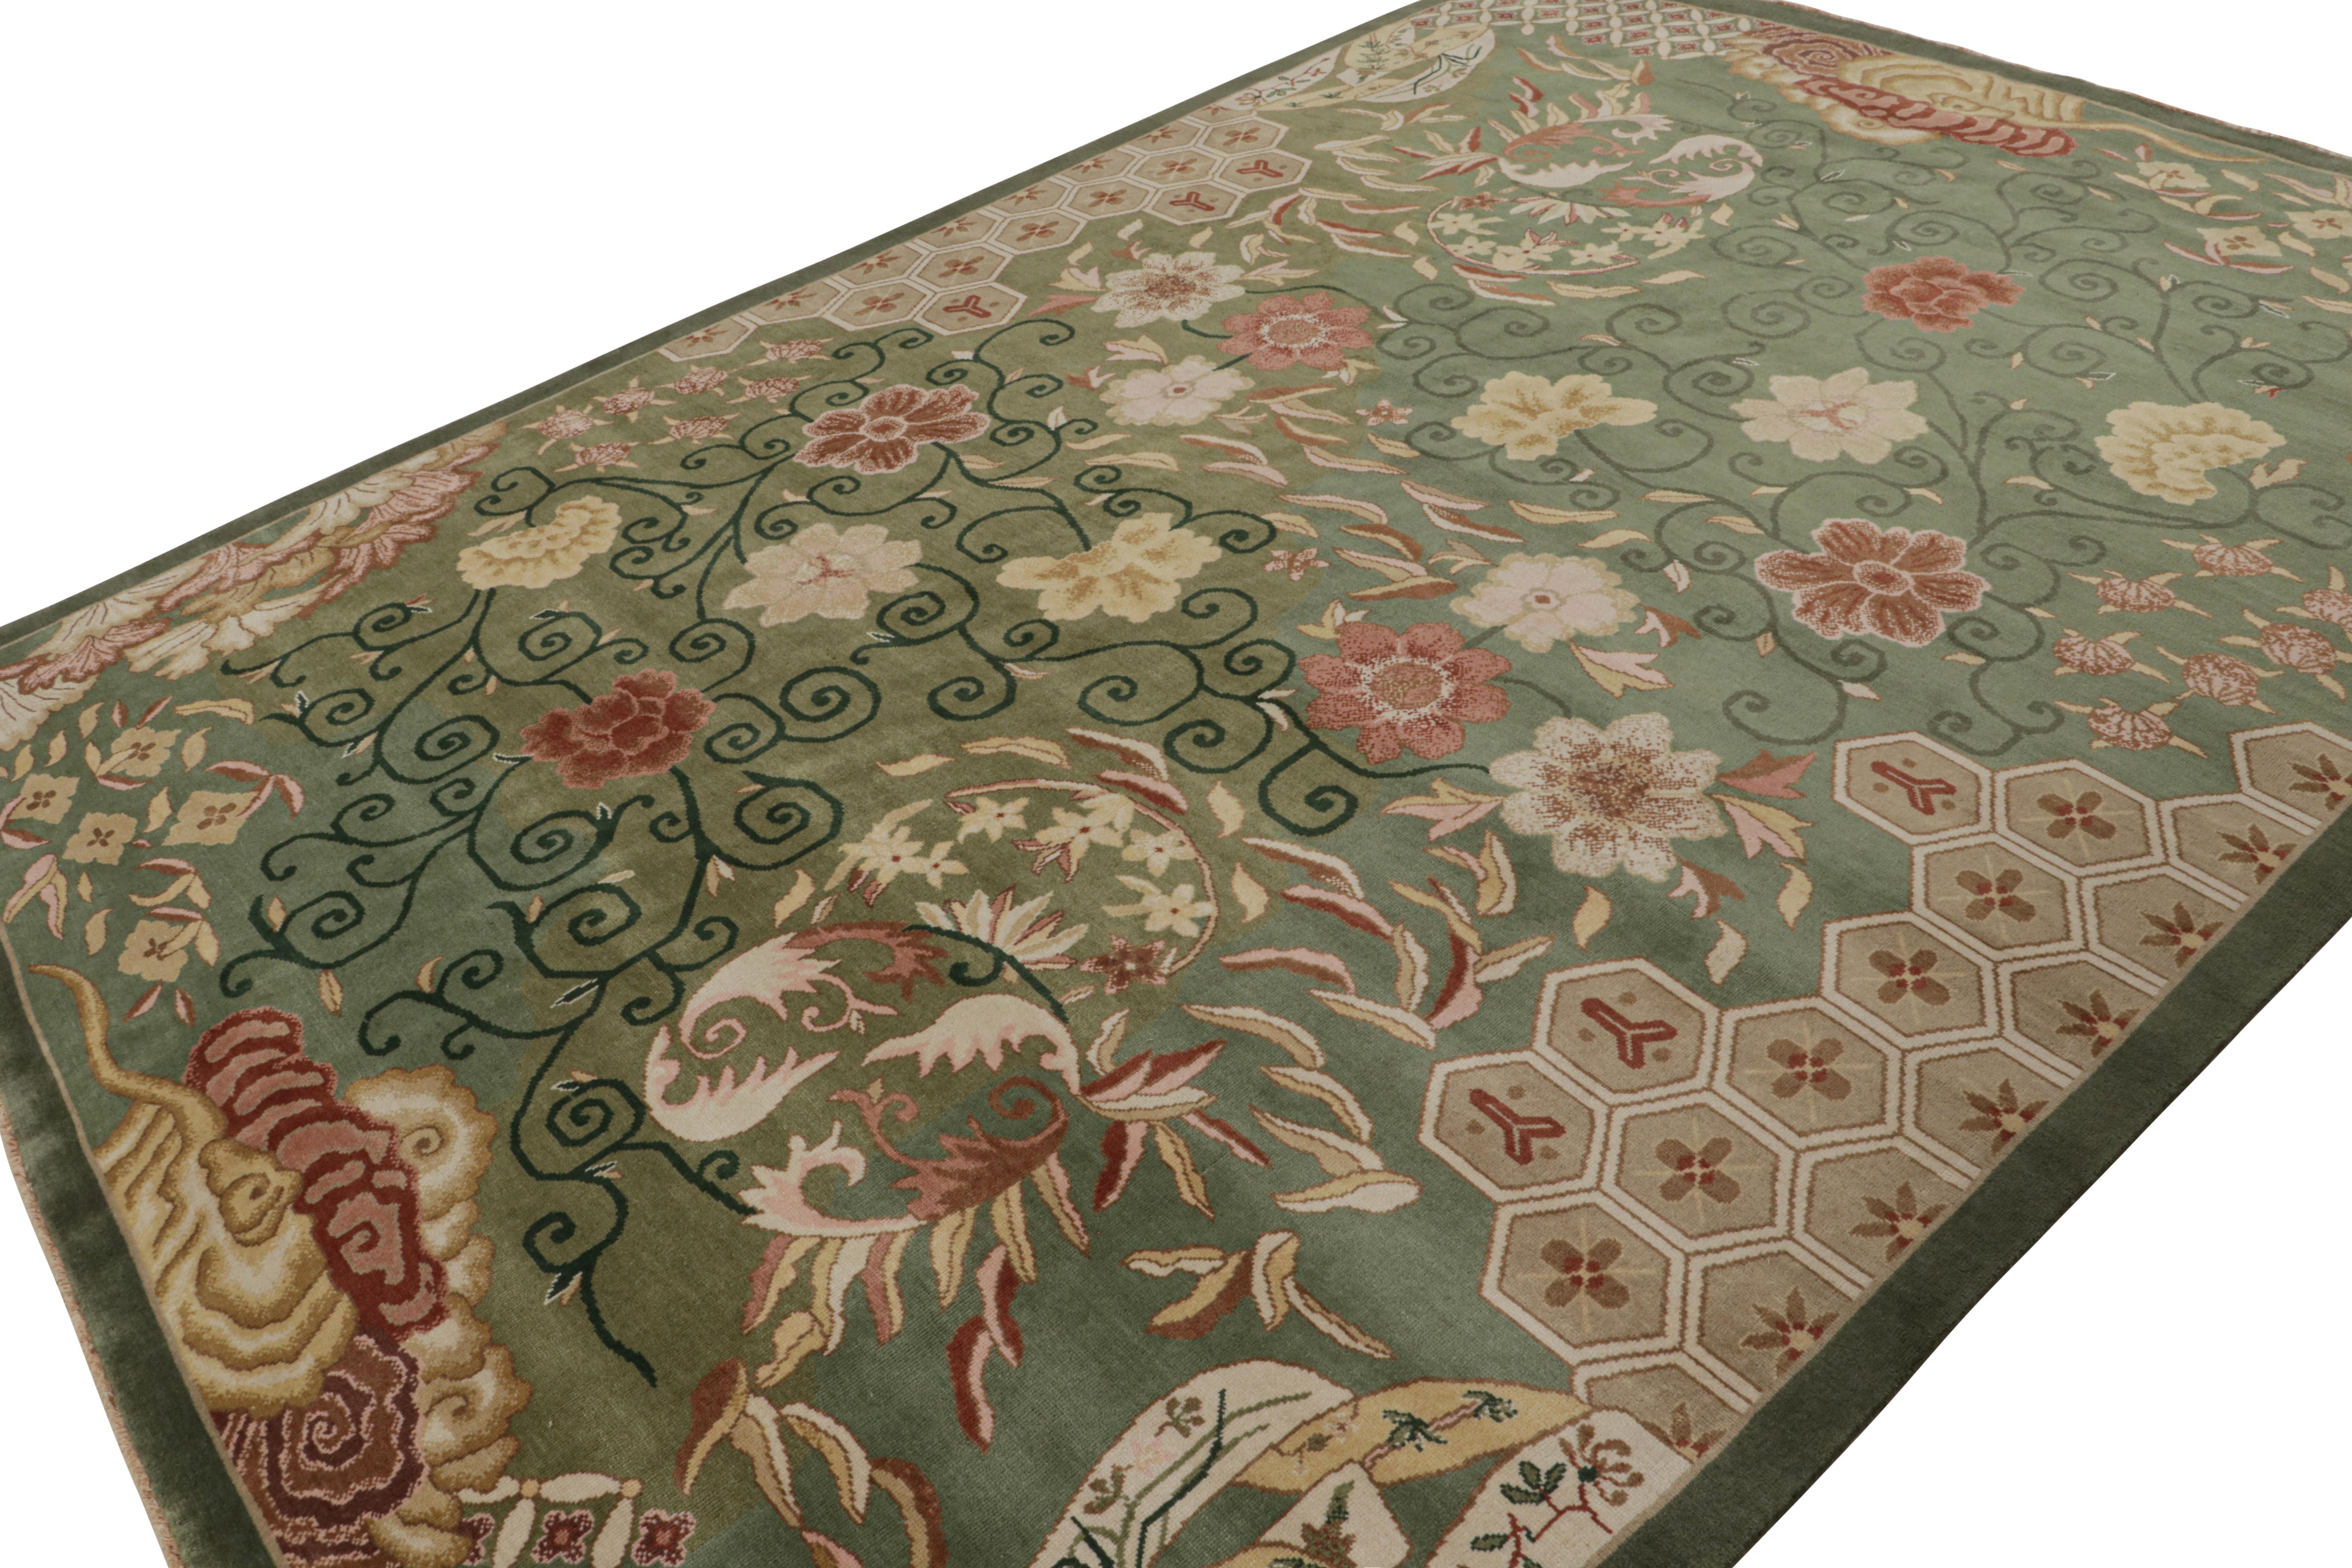 Hand knotted in wool, a 9x12 Chinese art deco style rug inspired by rare period pieces of the 1920s Nichols style. 

On the Design: 

The design boasts an all over floral pattern in tones of green & brown. Keen eyes will admire the fine detailing in